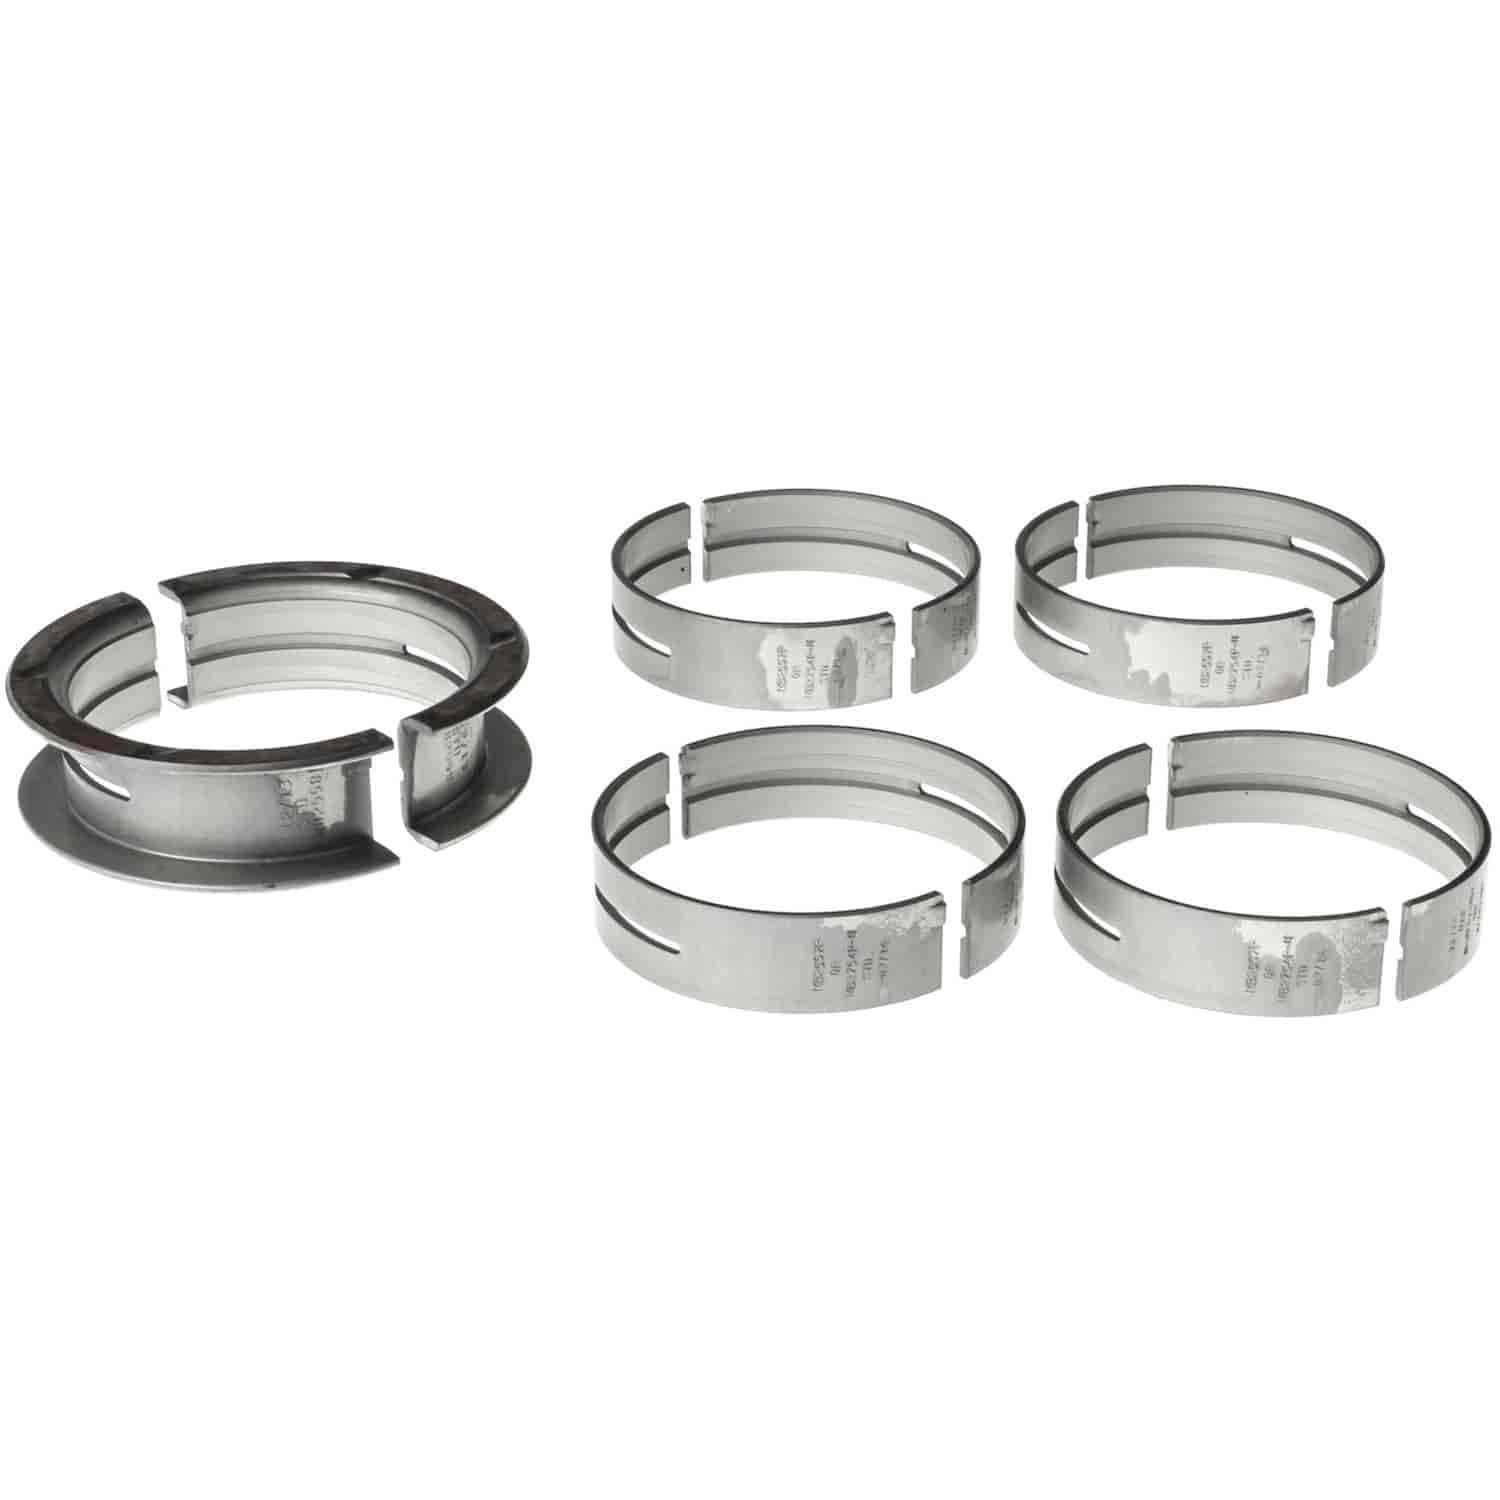 Main Bearing Set Ford 1969-1997 V8 351W/351M/400 (5.8/6.6L) with -.010" Undersize